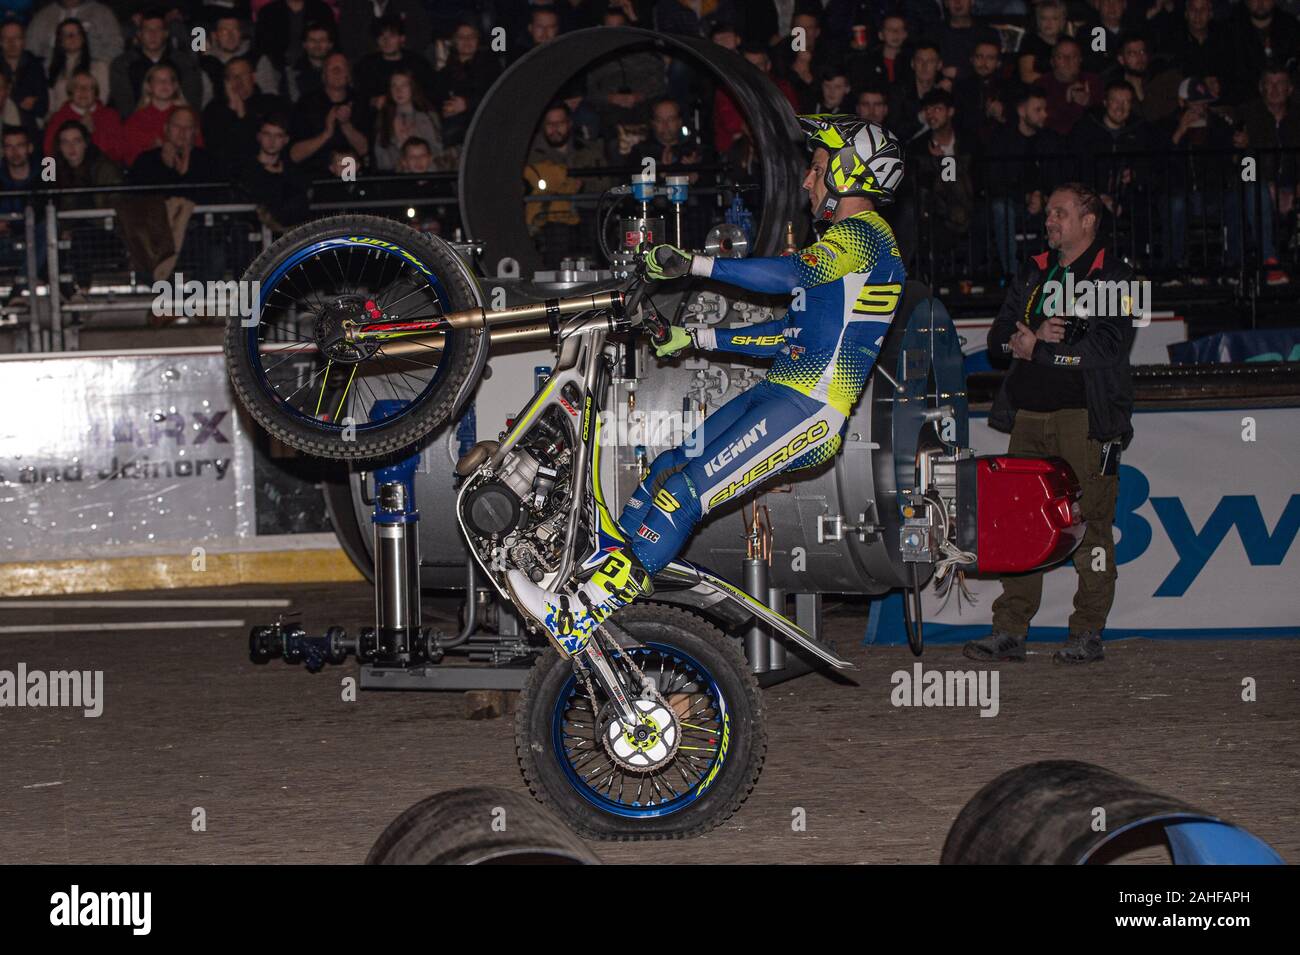 SHEFFIELD, ENGLAND - DECEMBER 28TH Jeroni Fajardo, Spain (Sherco) makes his entrance during the 25th Anniversary Sheffield Indoor Trial at the FlyDSA Arena, Sheffield on Saturday 28th December 2019. (Credit: Ian Charles | MI News) Credit: MI News & Sport /Alamy Live News Stock Photo